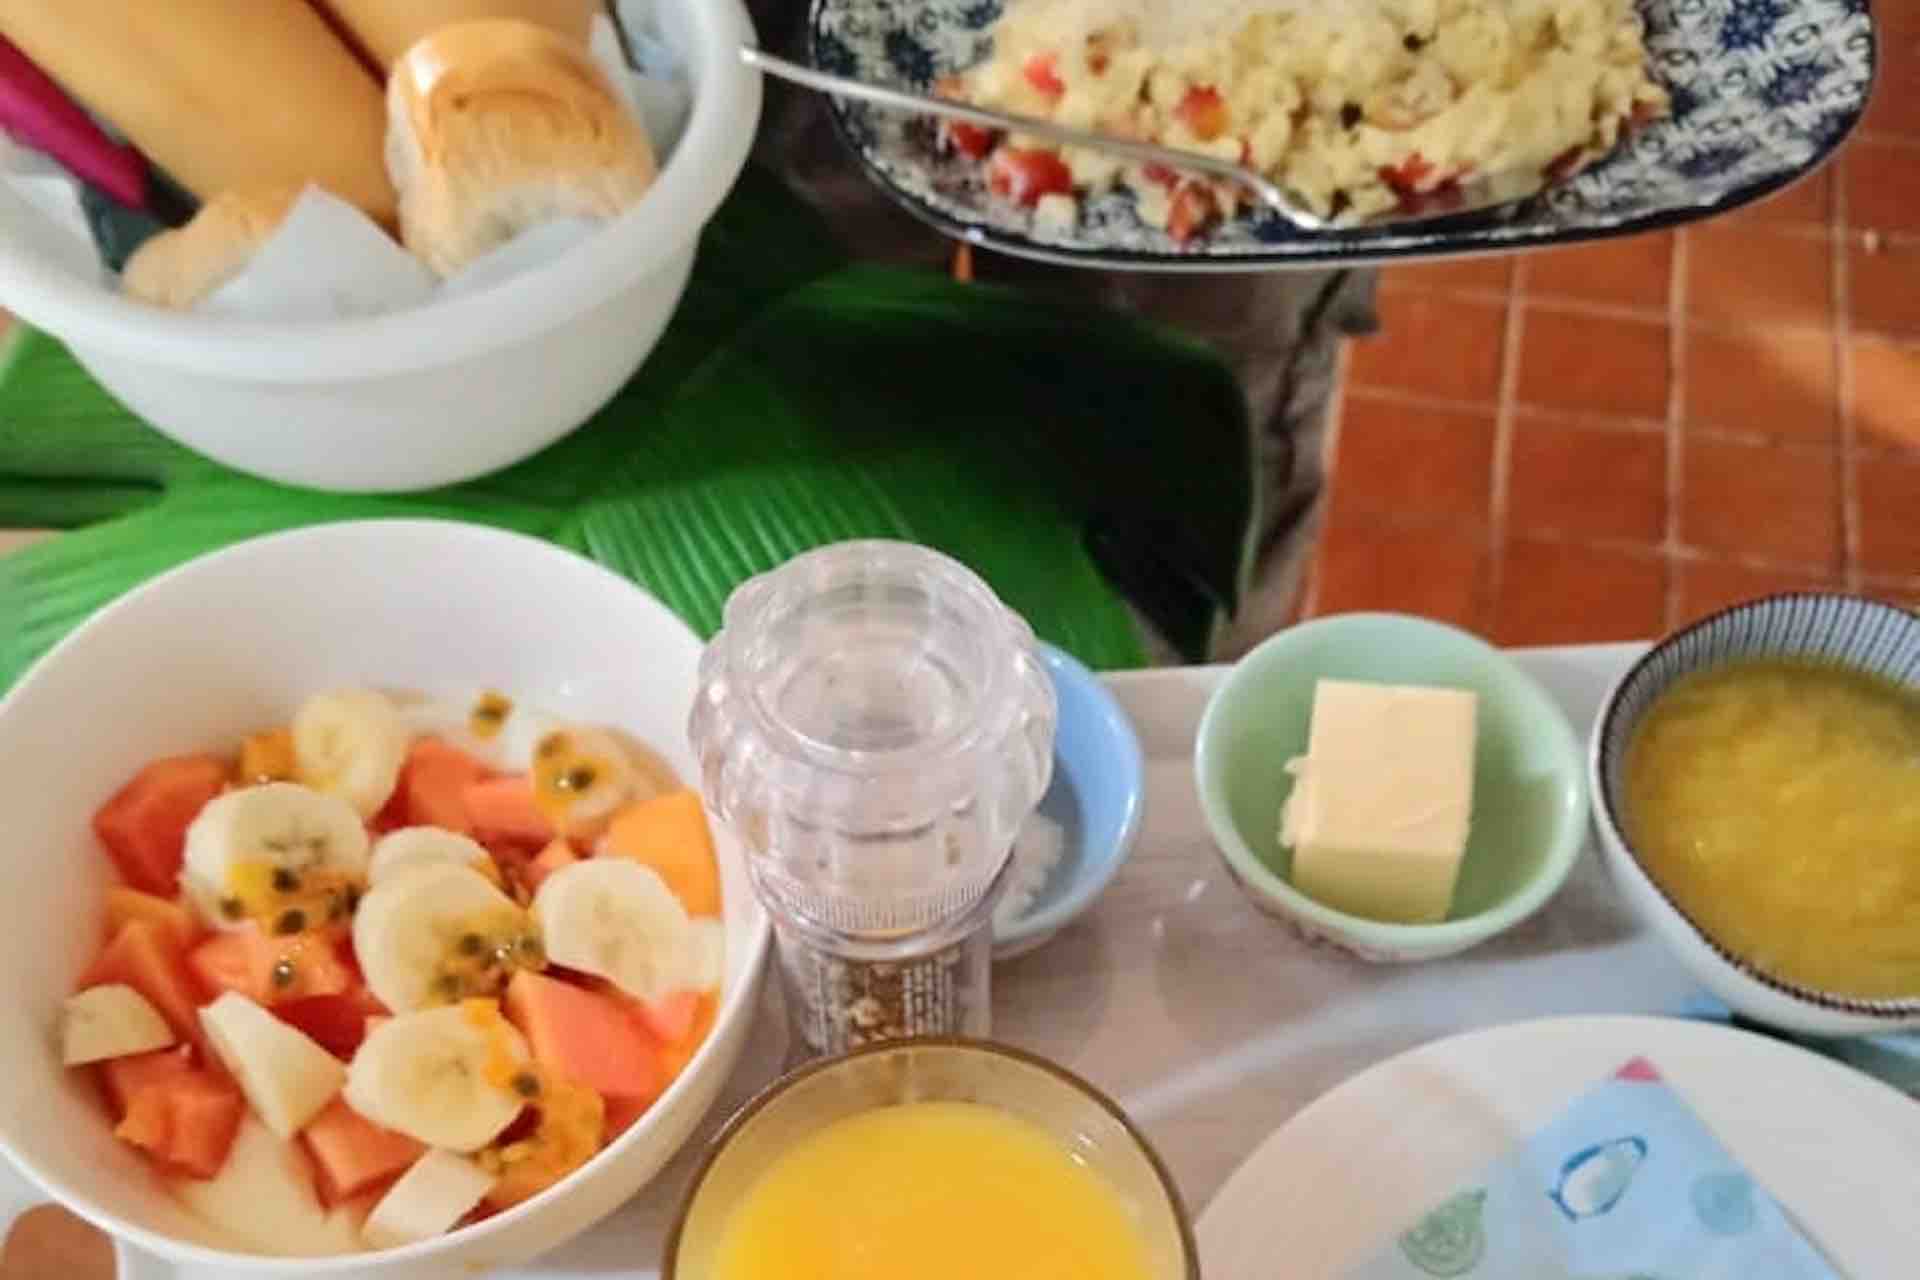 Chagres National Park lodge breakfast